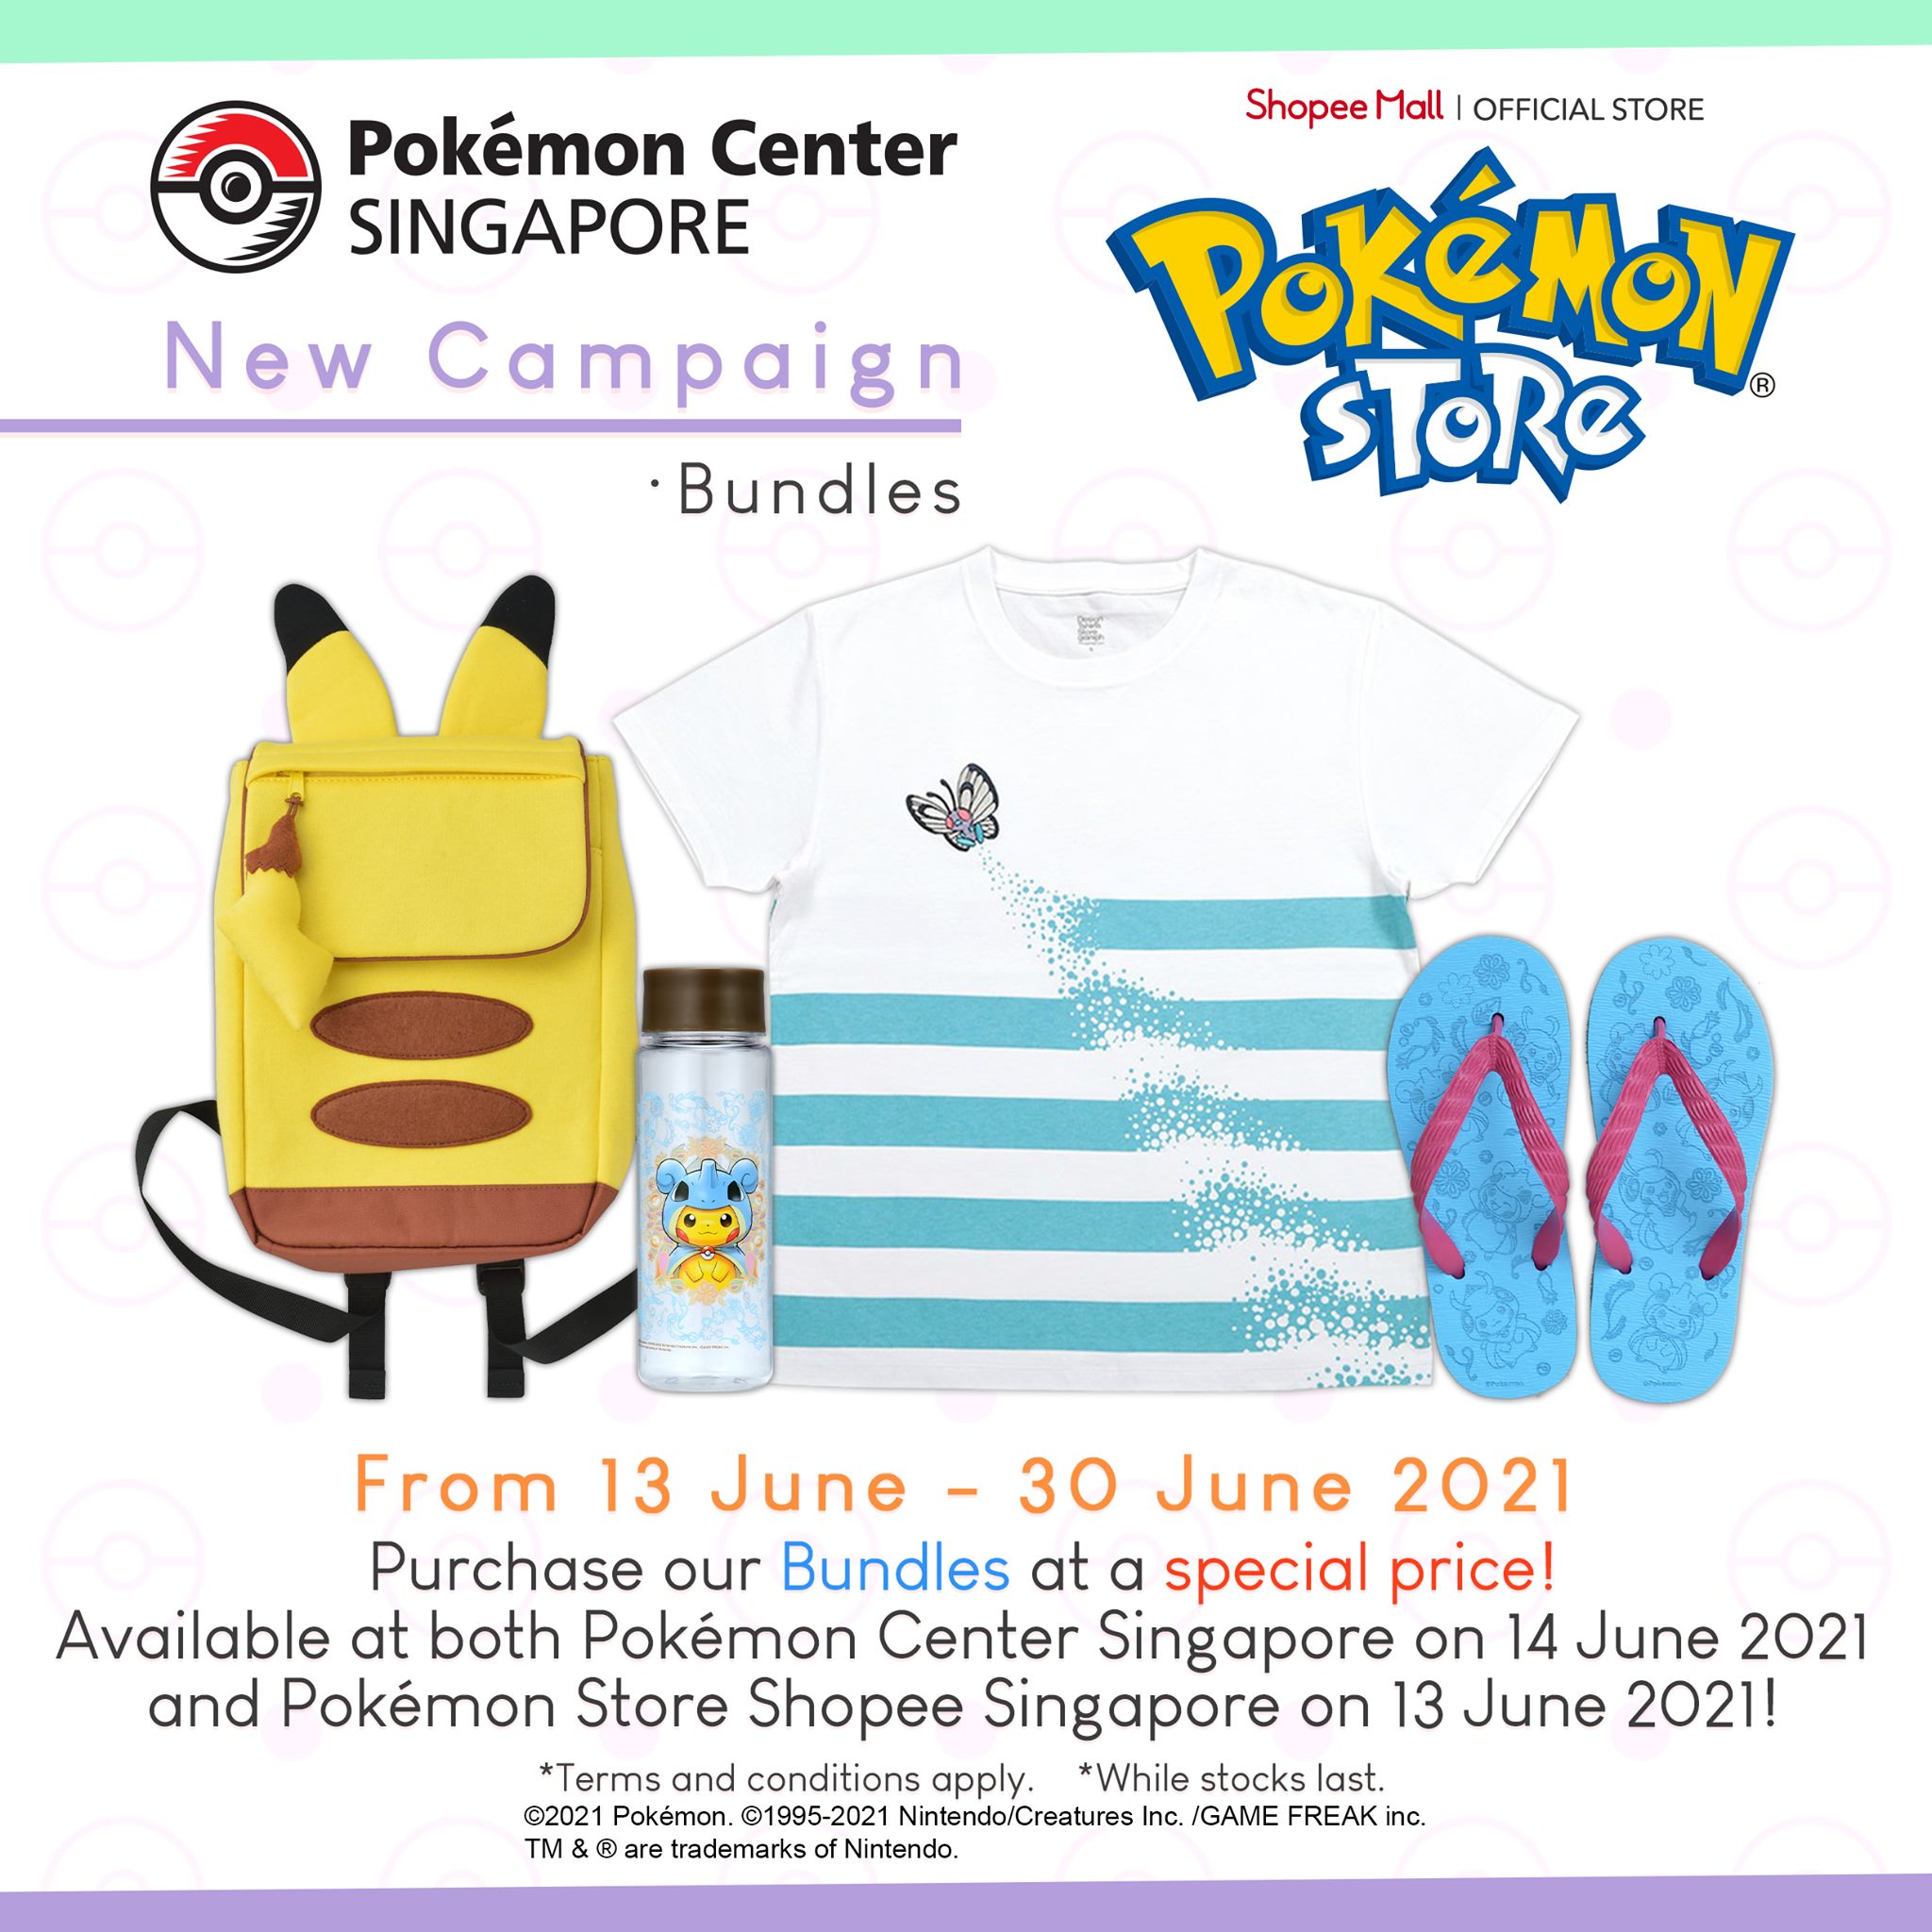 The official Pokémon Website in Singapore